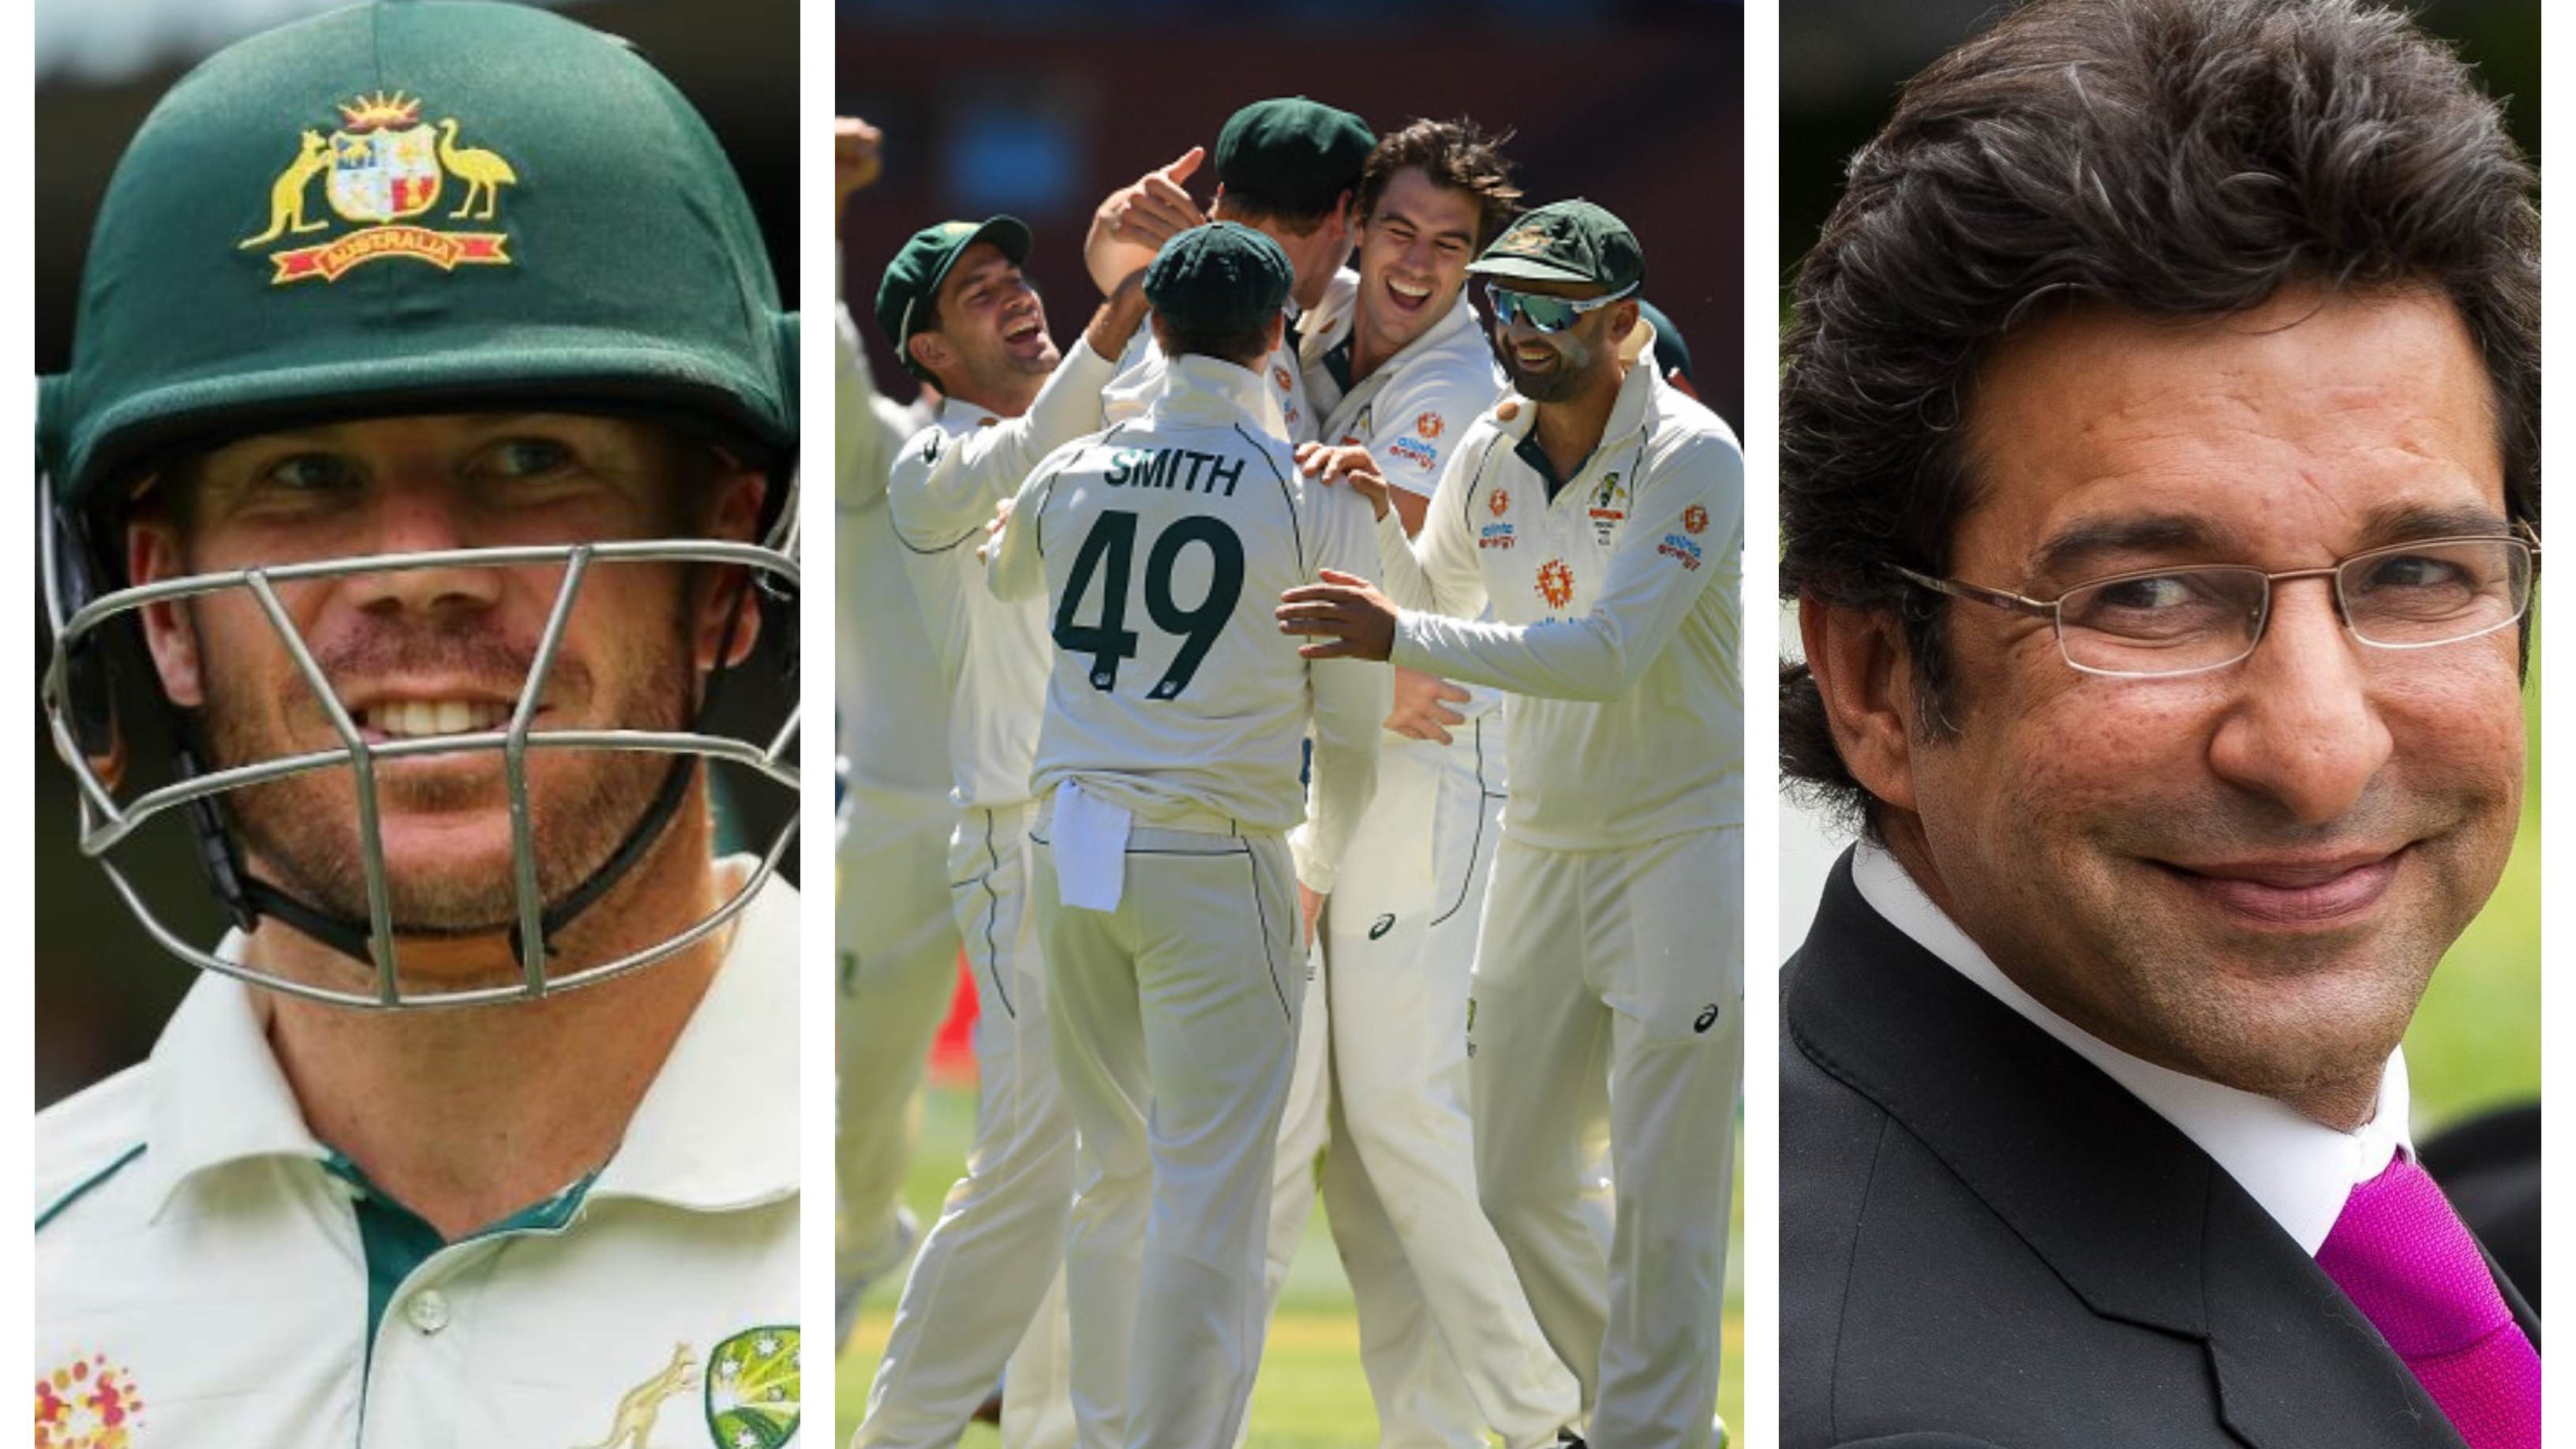 AUS v IND 2020-21: Cricket fraternity reacts as Australia bounce back emphatically to win the first Test by 8 wickets